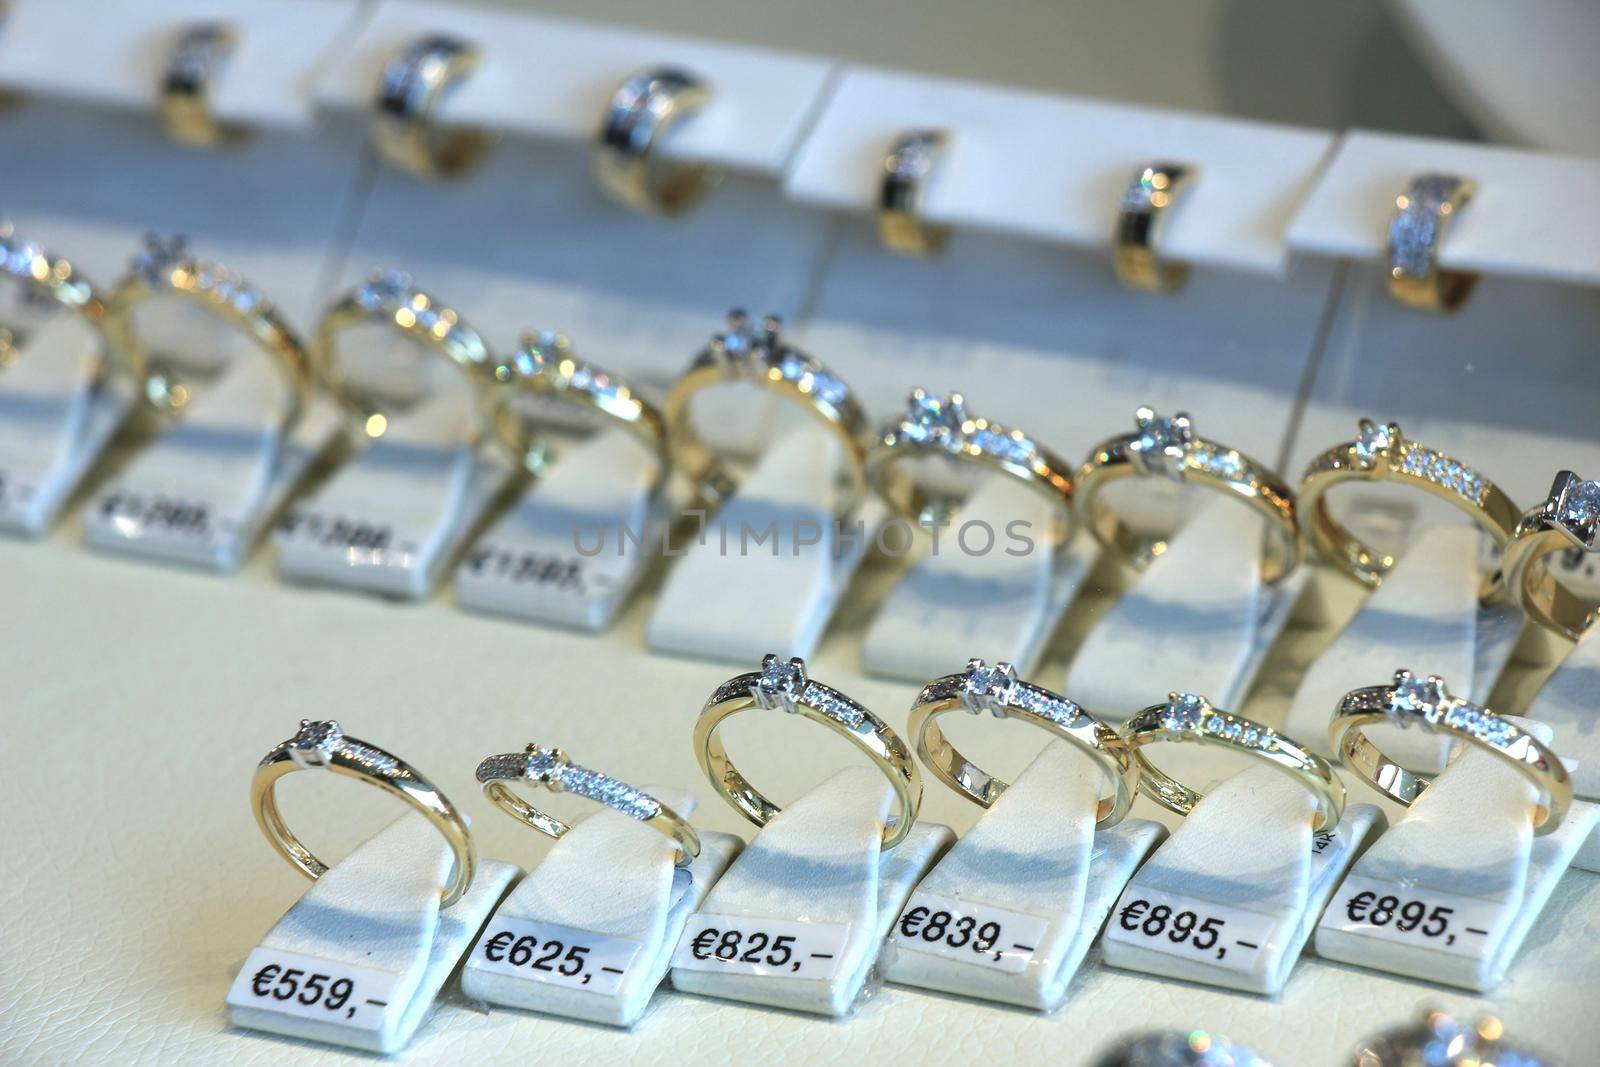 Diamond engagement rings in a shop display